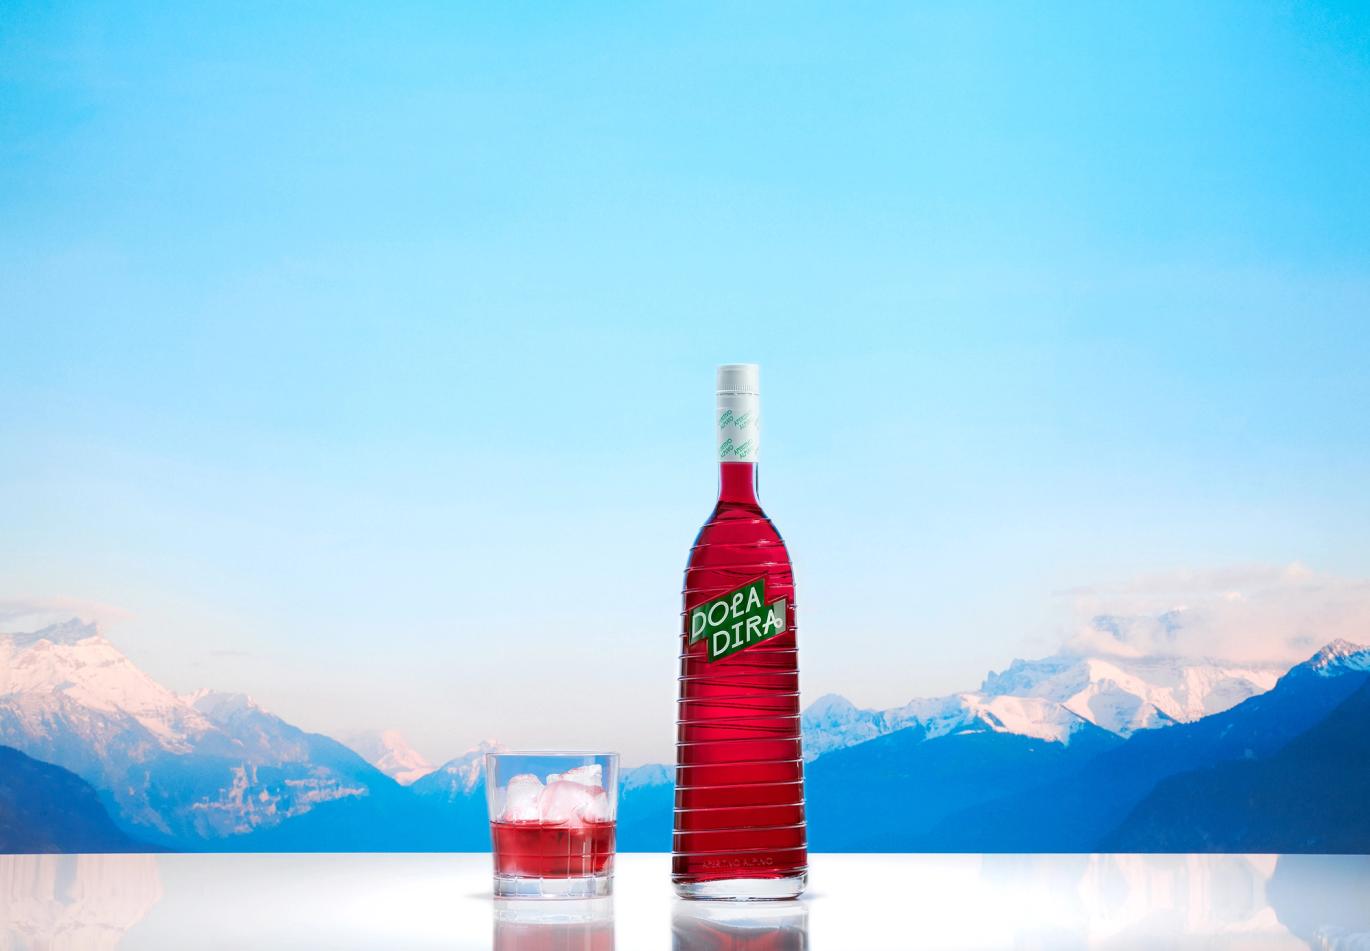 Rocks glass with Doladira poured in, Doladira bottle, in front of a snowy mountain range